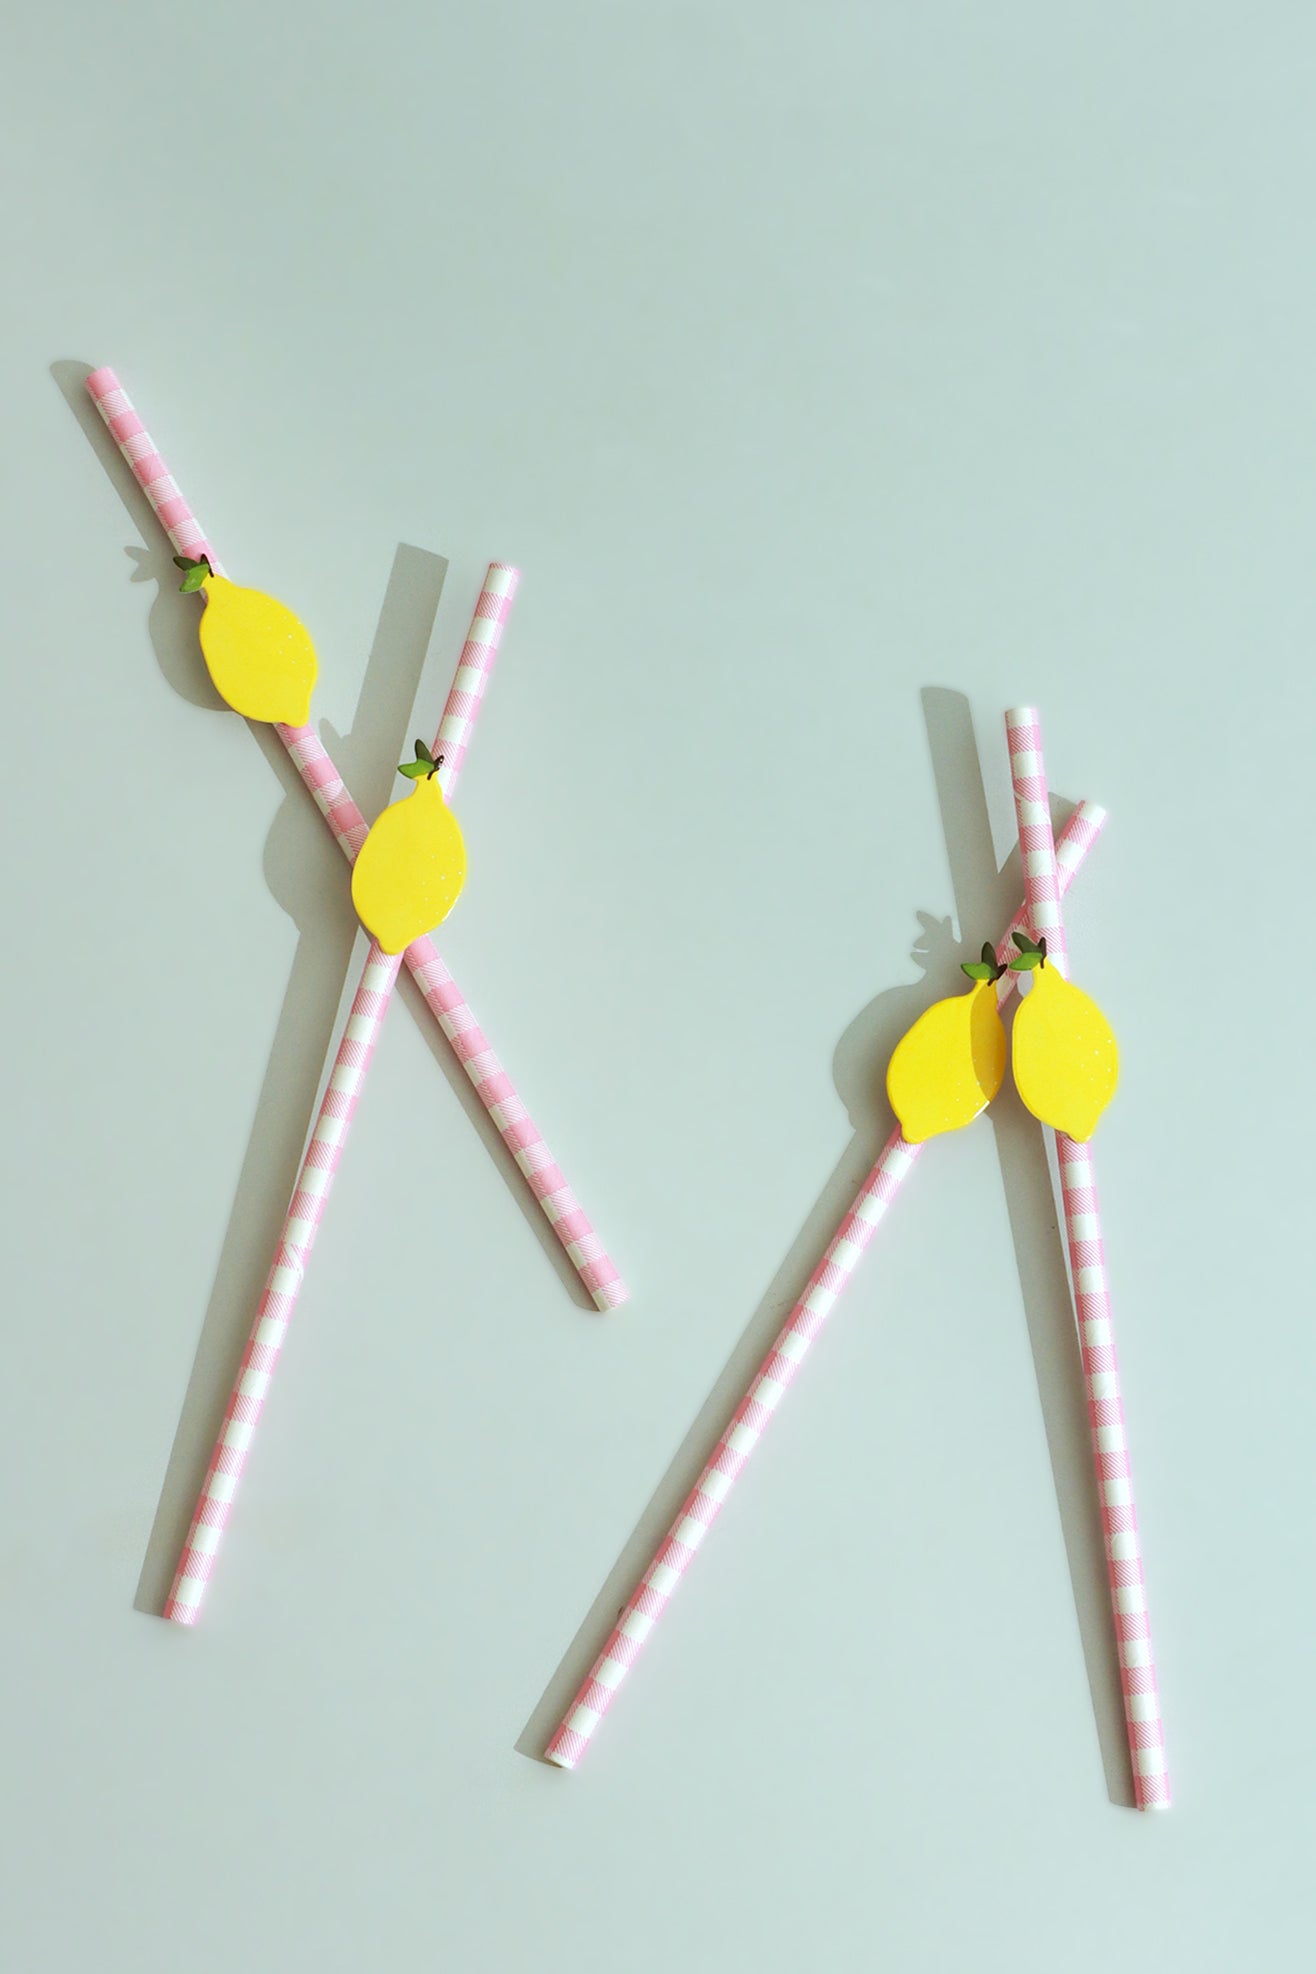 Set of 20 Pink and White Gingham Pattern Paper Straws with Lemon Decoration